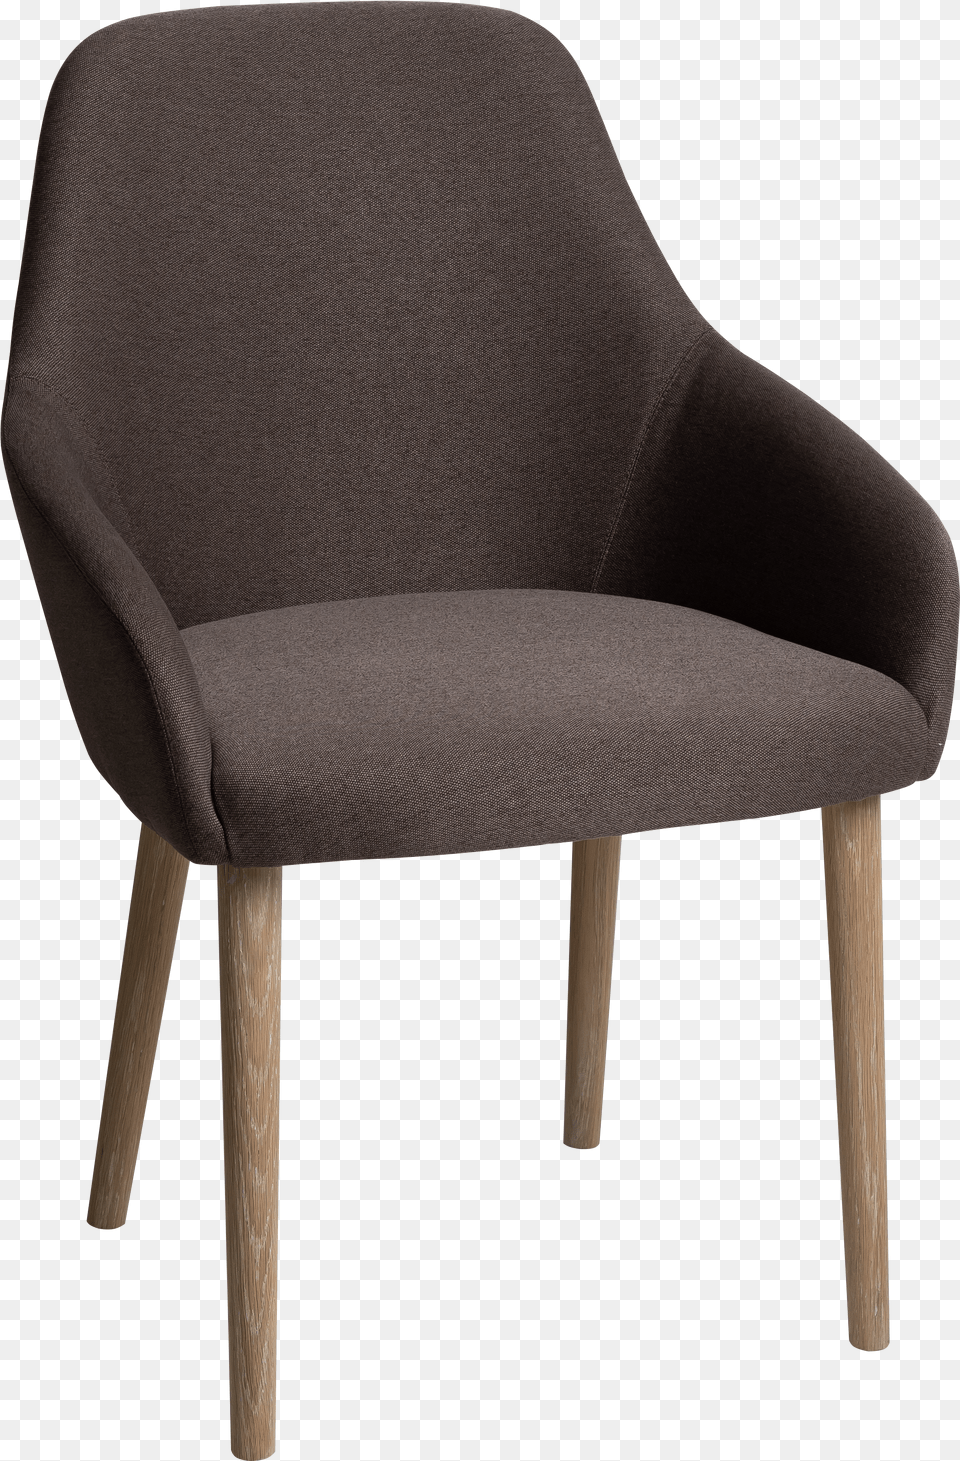 Chair Png